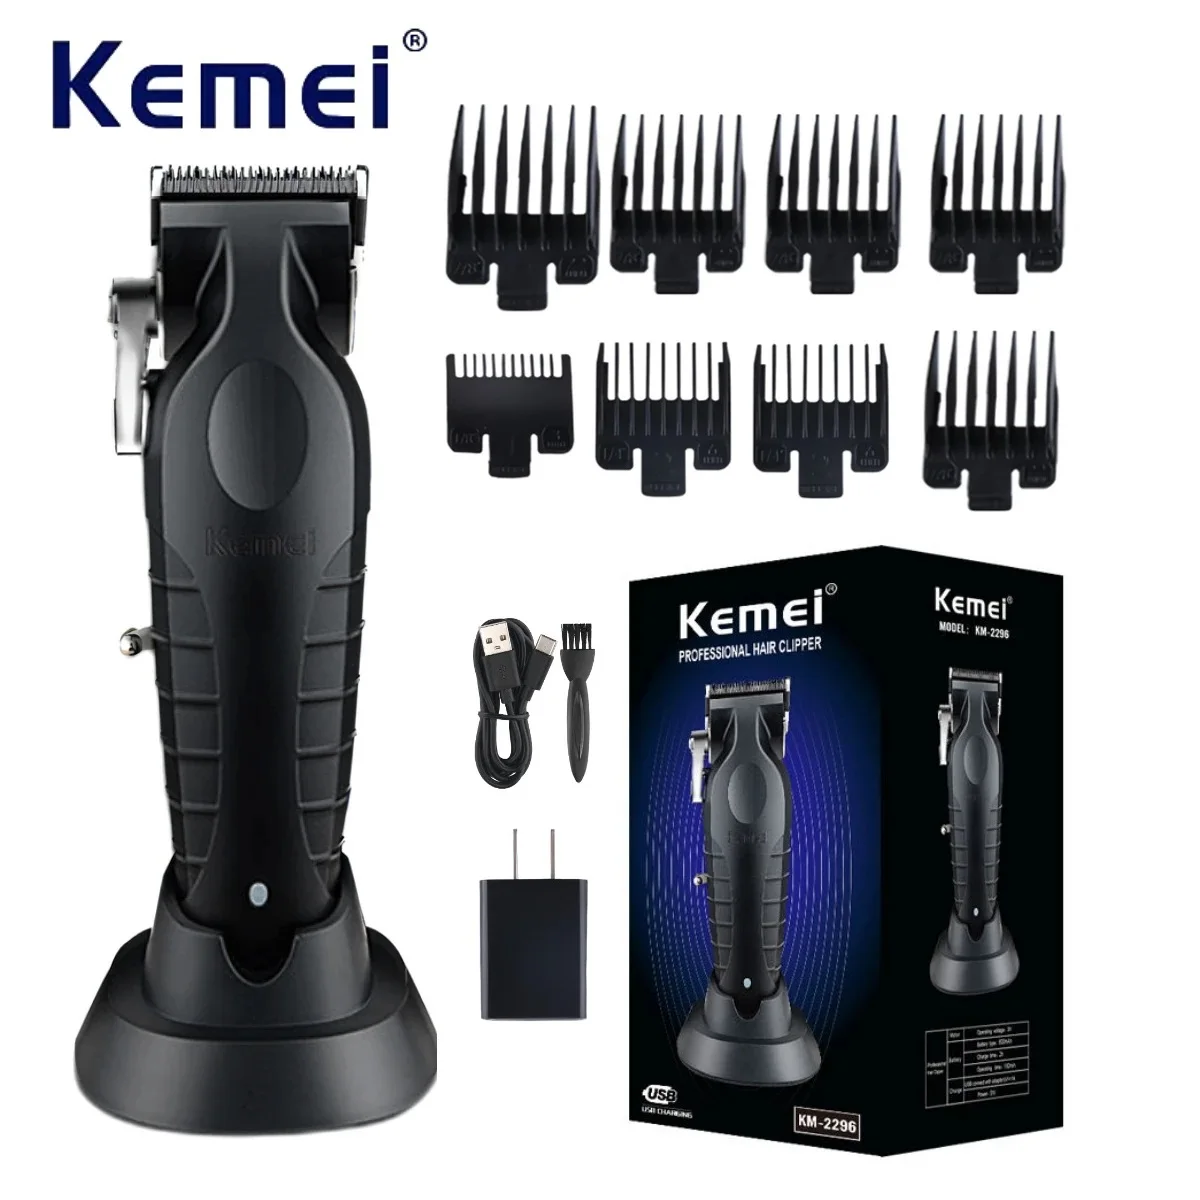 2500mah Lithium Battery Adjustable Trimmer Kemei Km-2296 Usb Rechargeable Cordless Electric Body Groin Hair Trimmer For Men